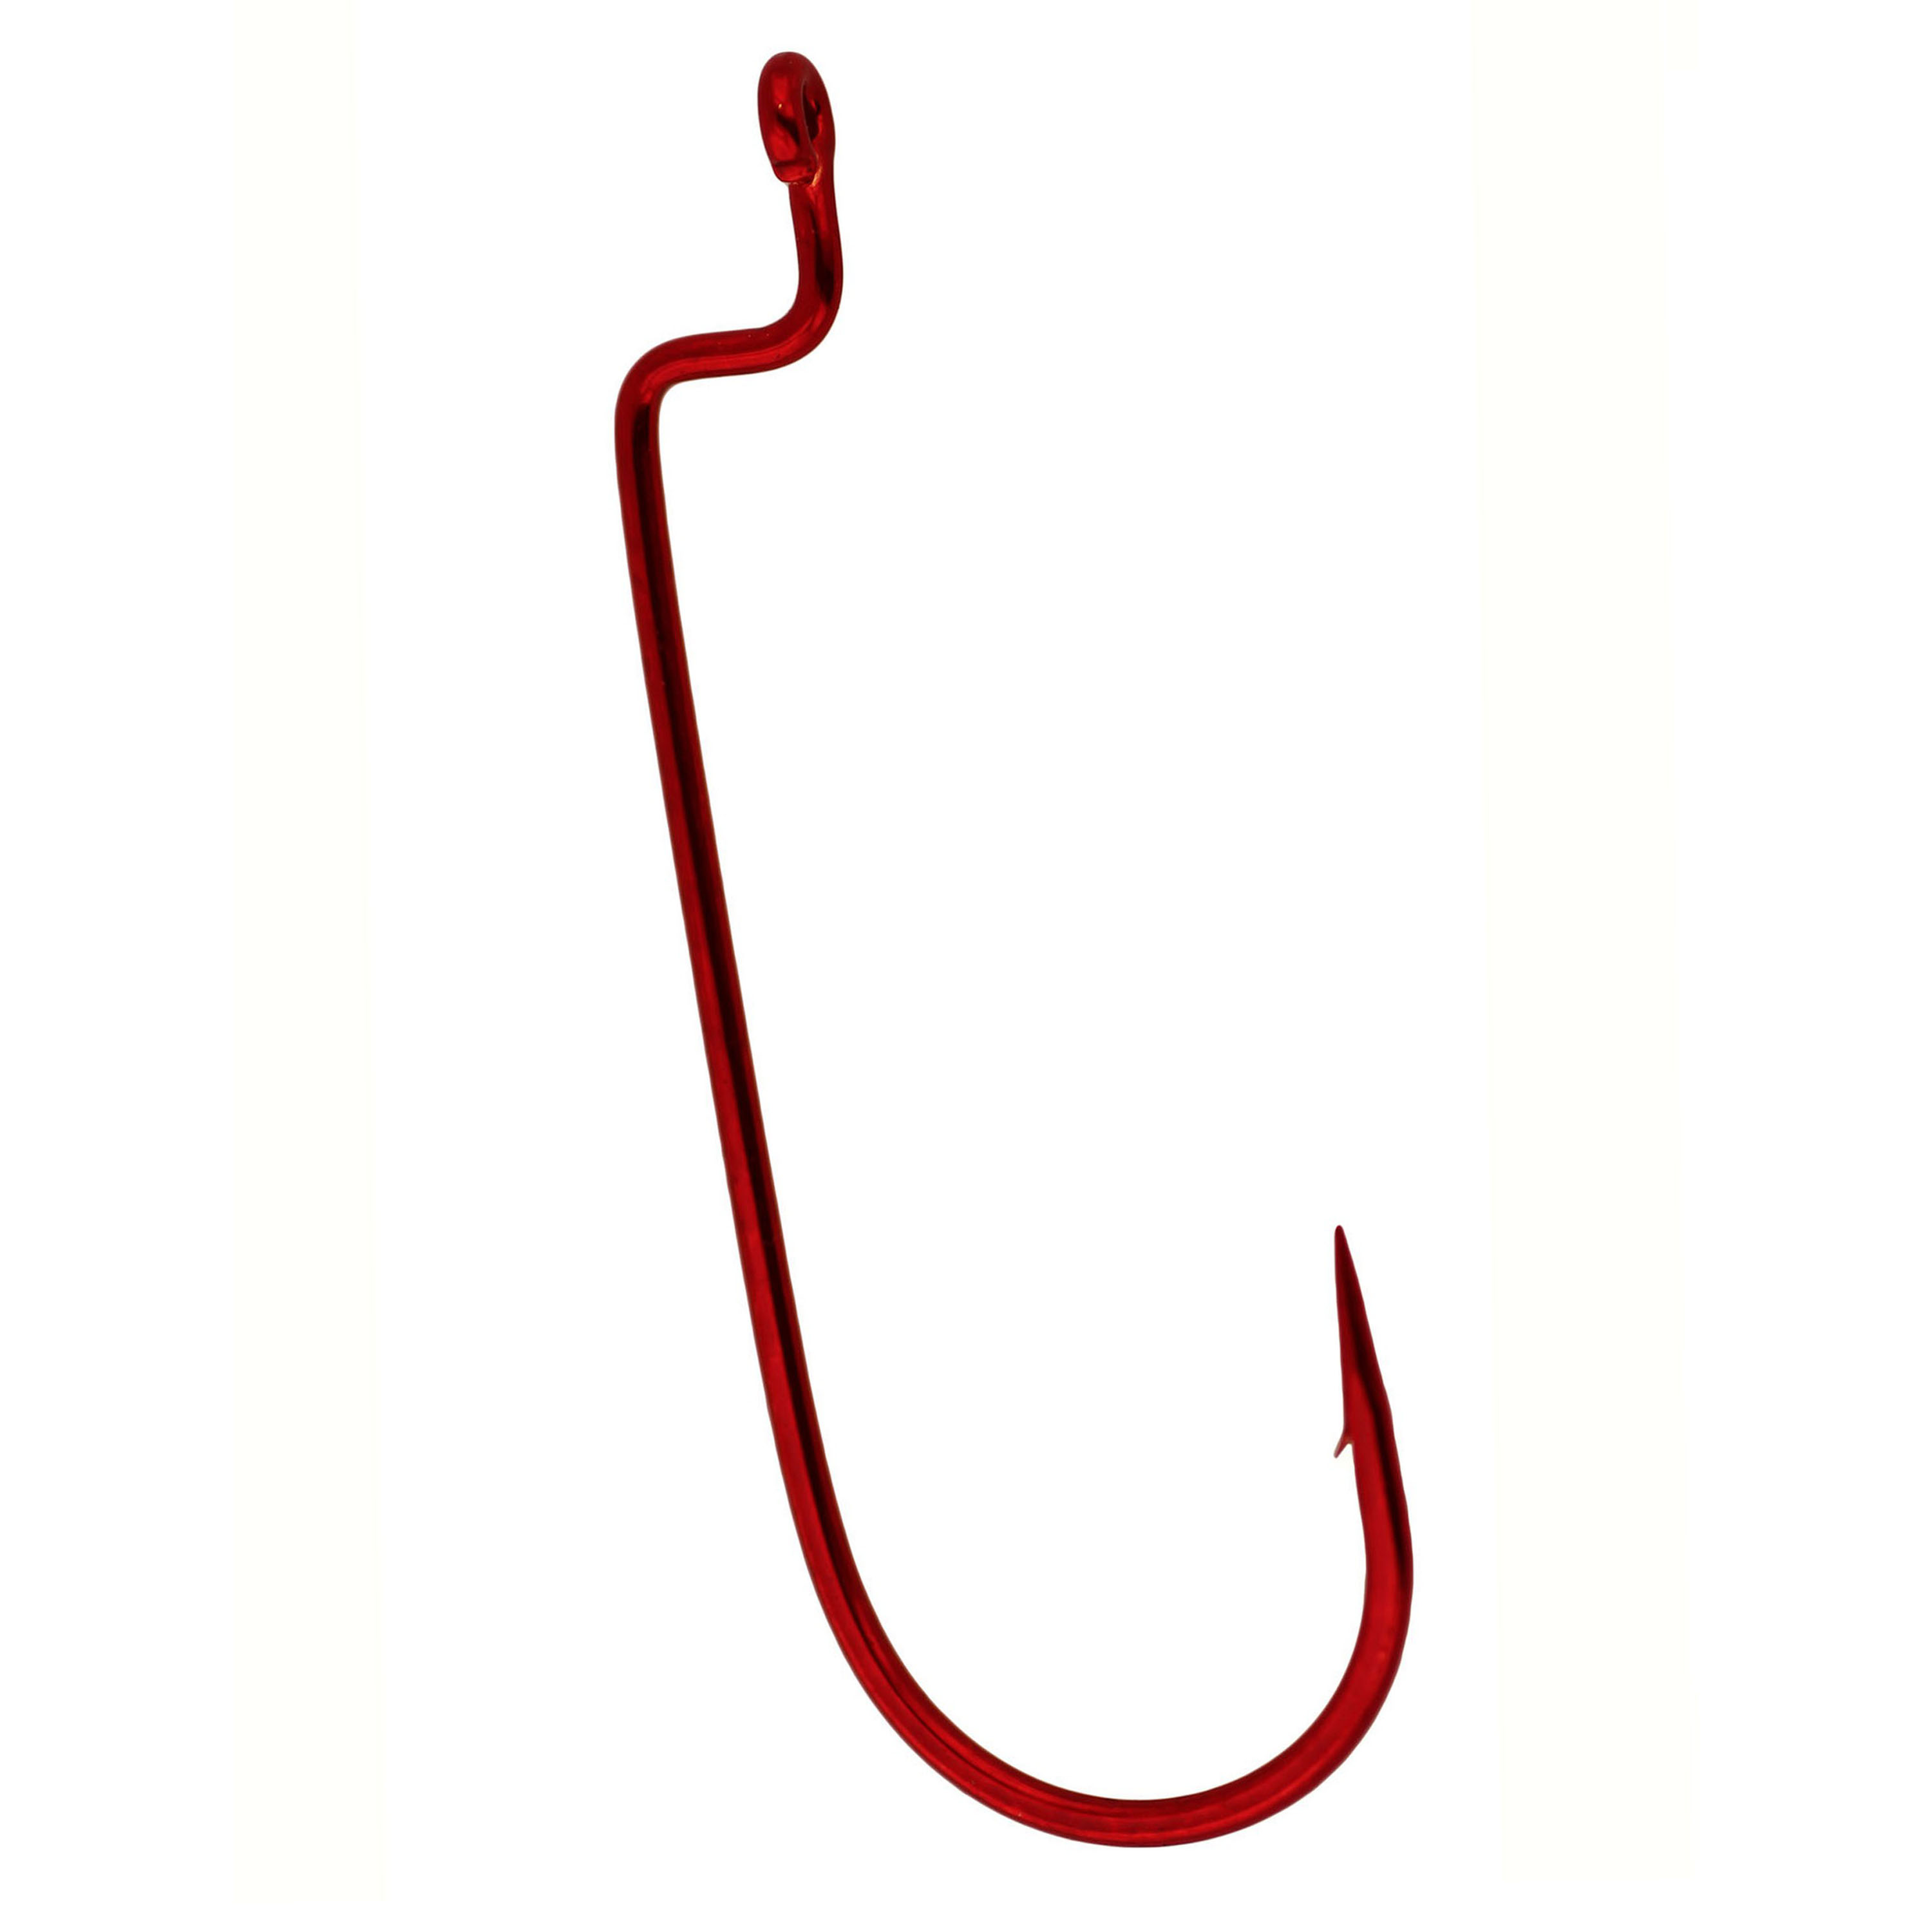 Gamakatsu Worm Offset Rb Red 1/0, 6 Hooks P/P 54311 , 30% Off